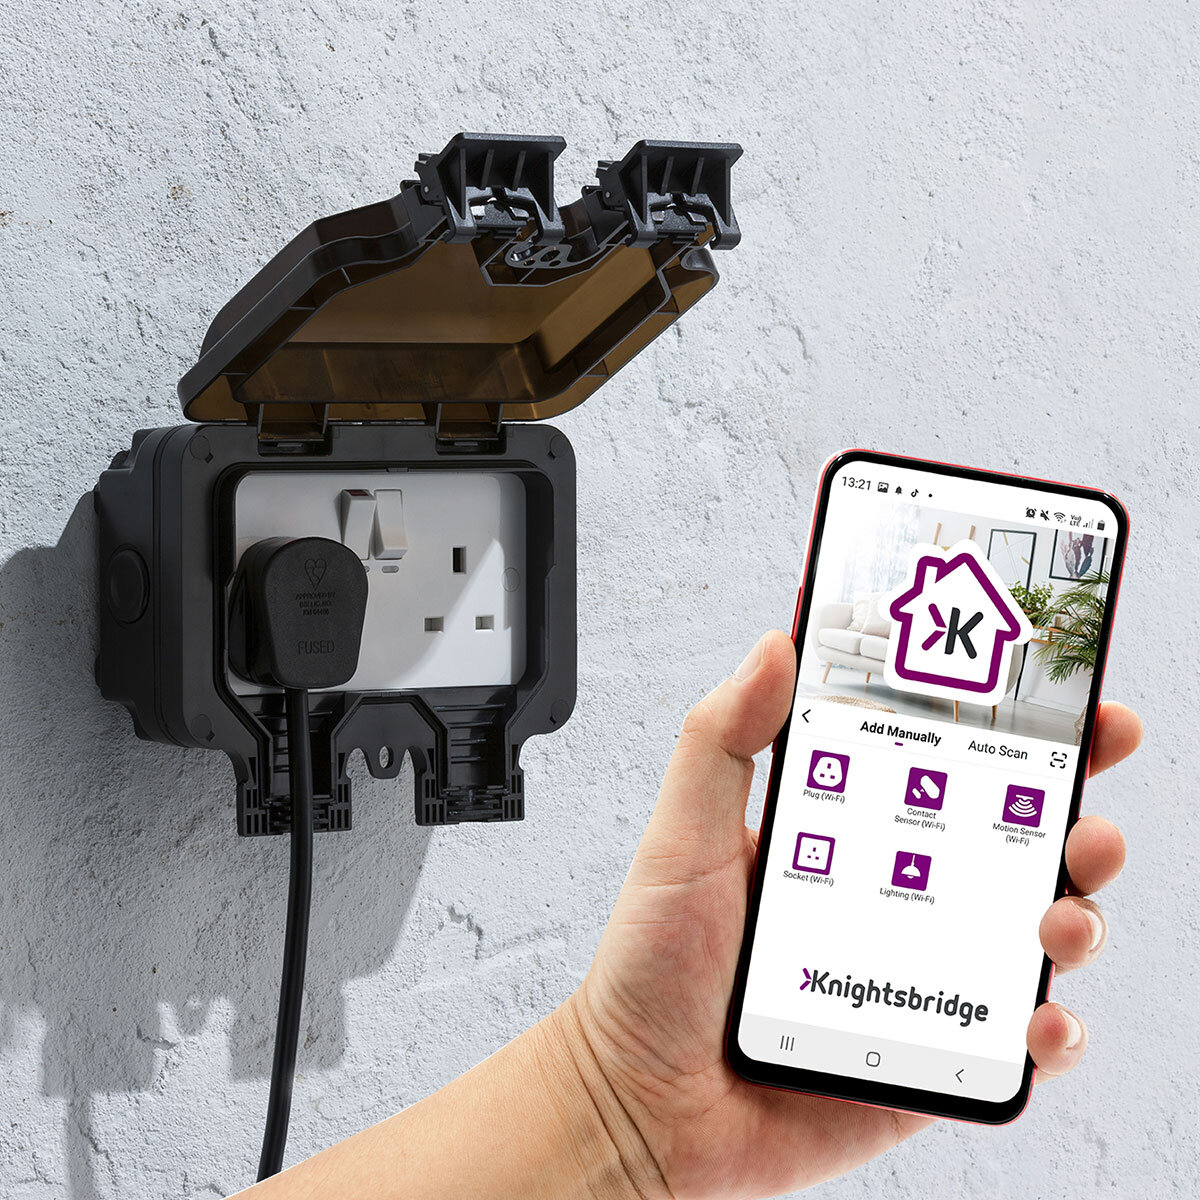 cut out image of smart outdoor socket